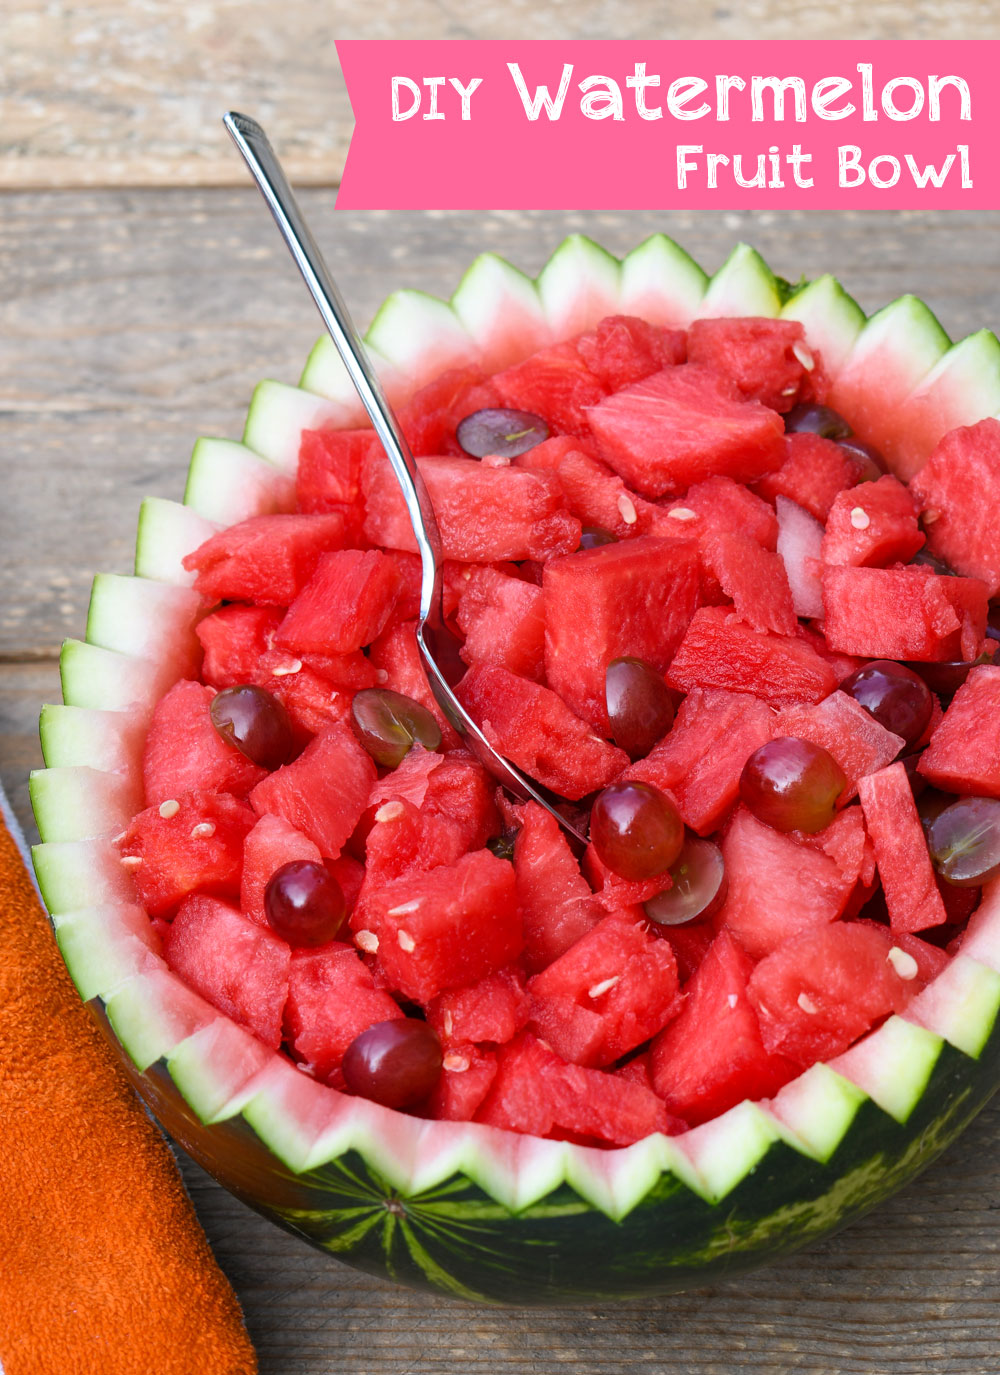 How to cut a fruit bowl from a watermelon